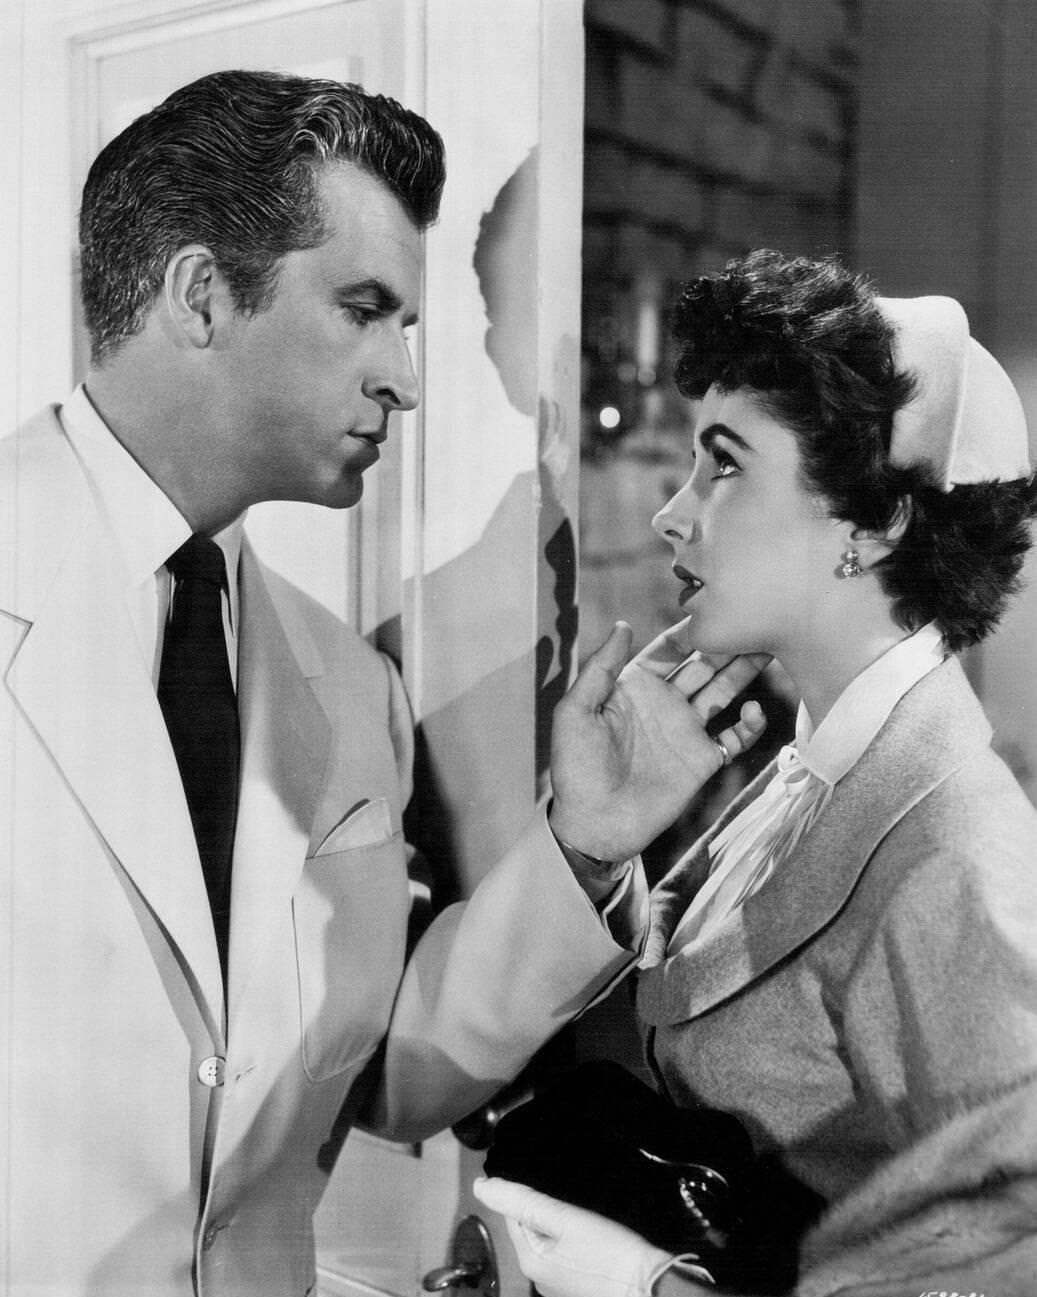 Elizabeth Taylor and Fernando Lamas in "The Girl Who Had Everything" (1953). Also starring William Powell.